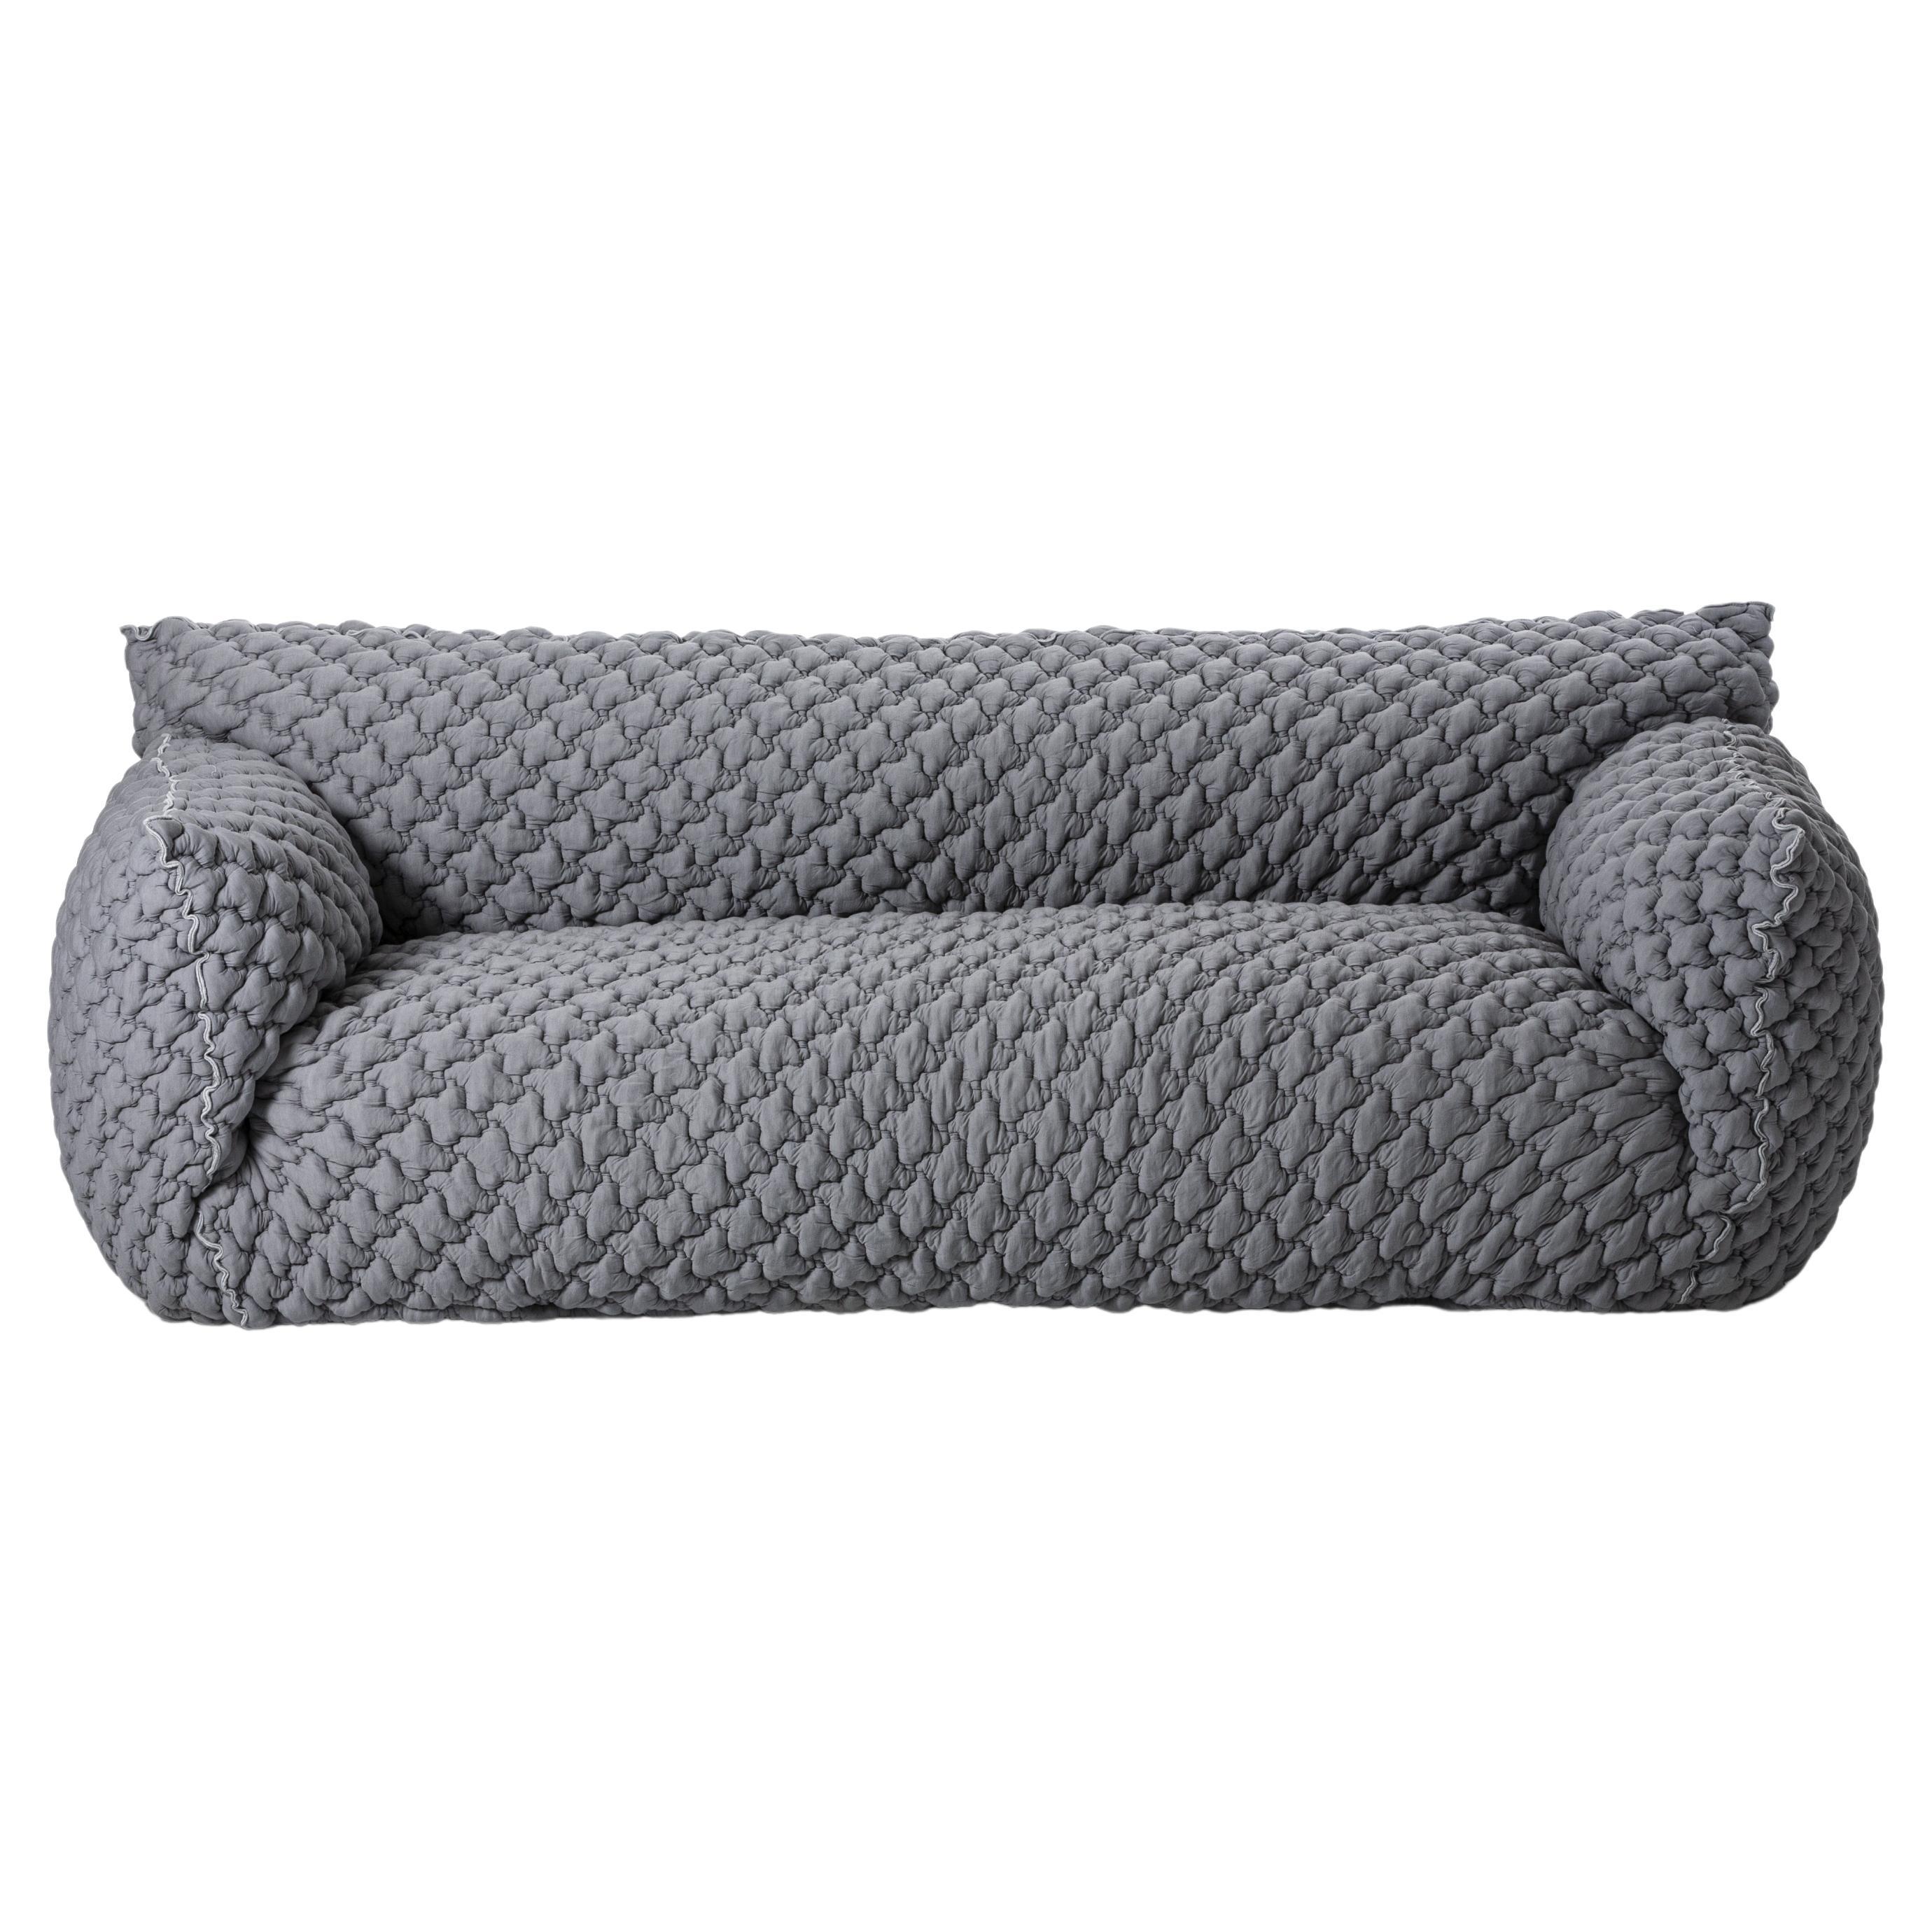 Gervasoni Nuvola 12 Sofa in E - 3D Gray Upholstery by Paola Navone For Sale